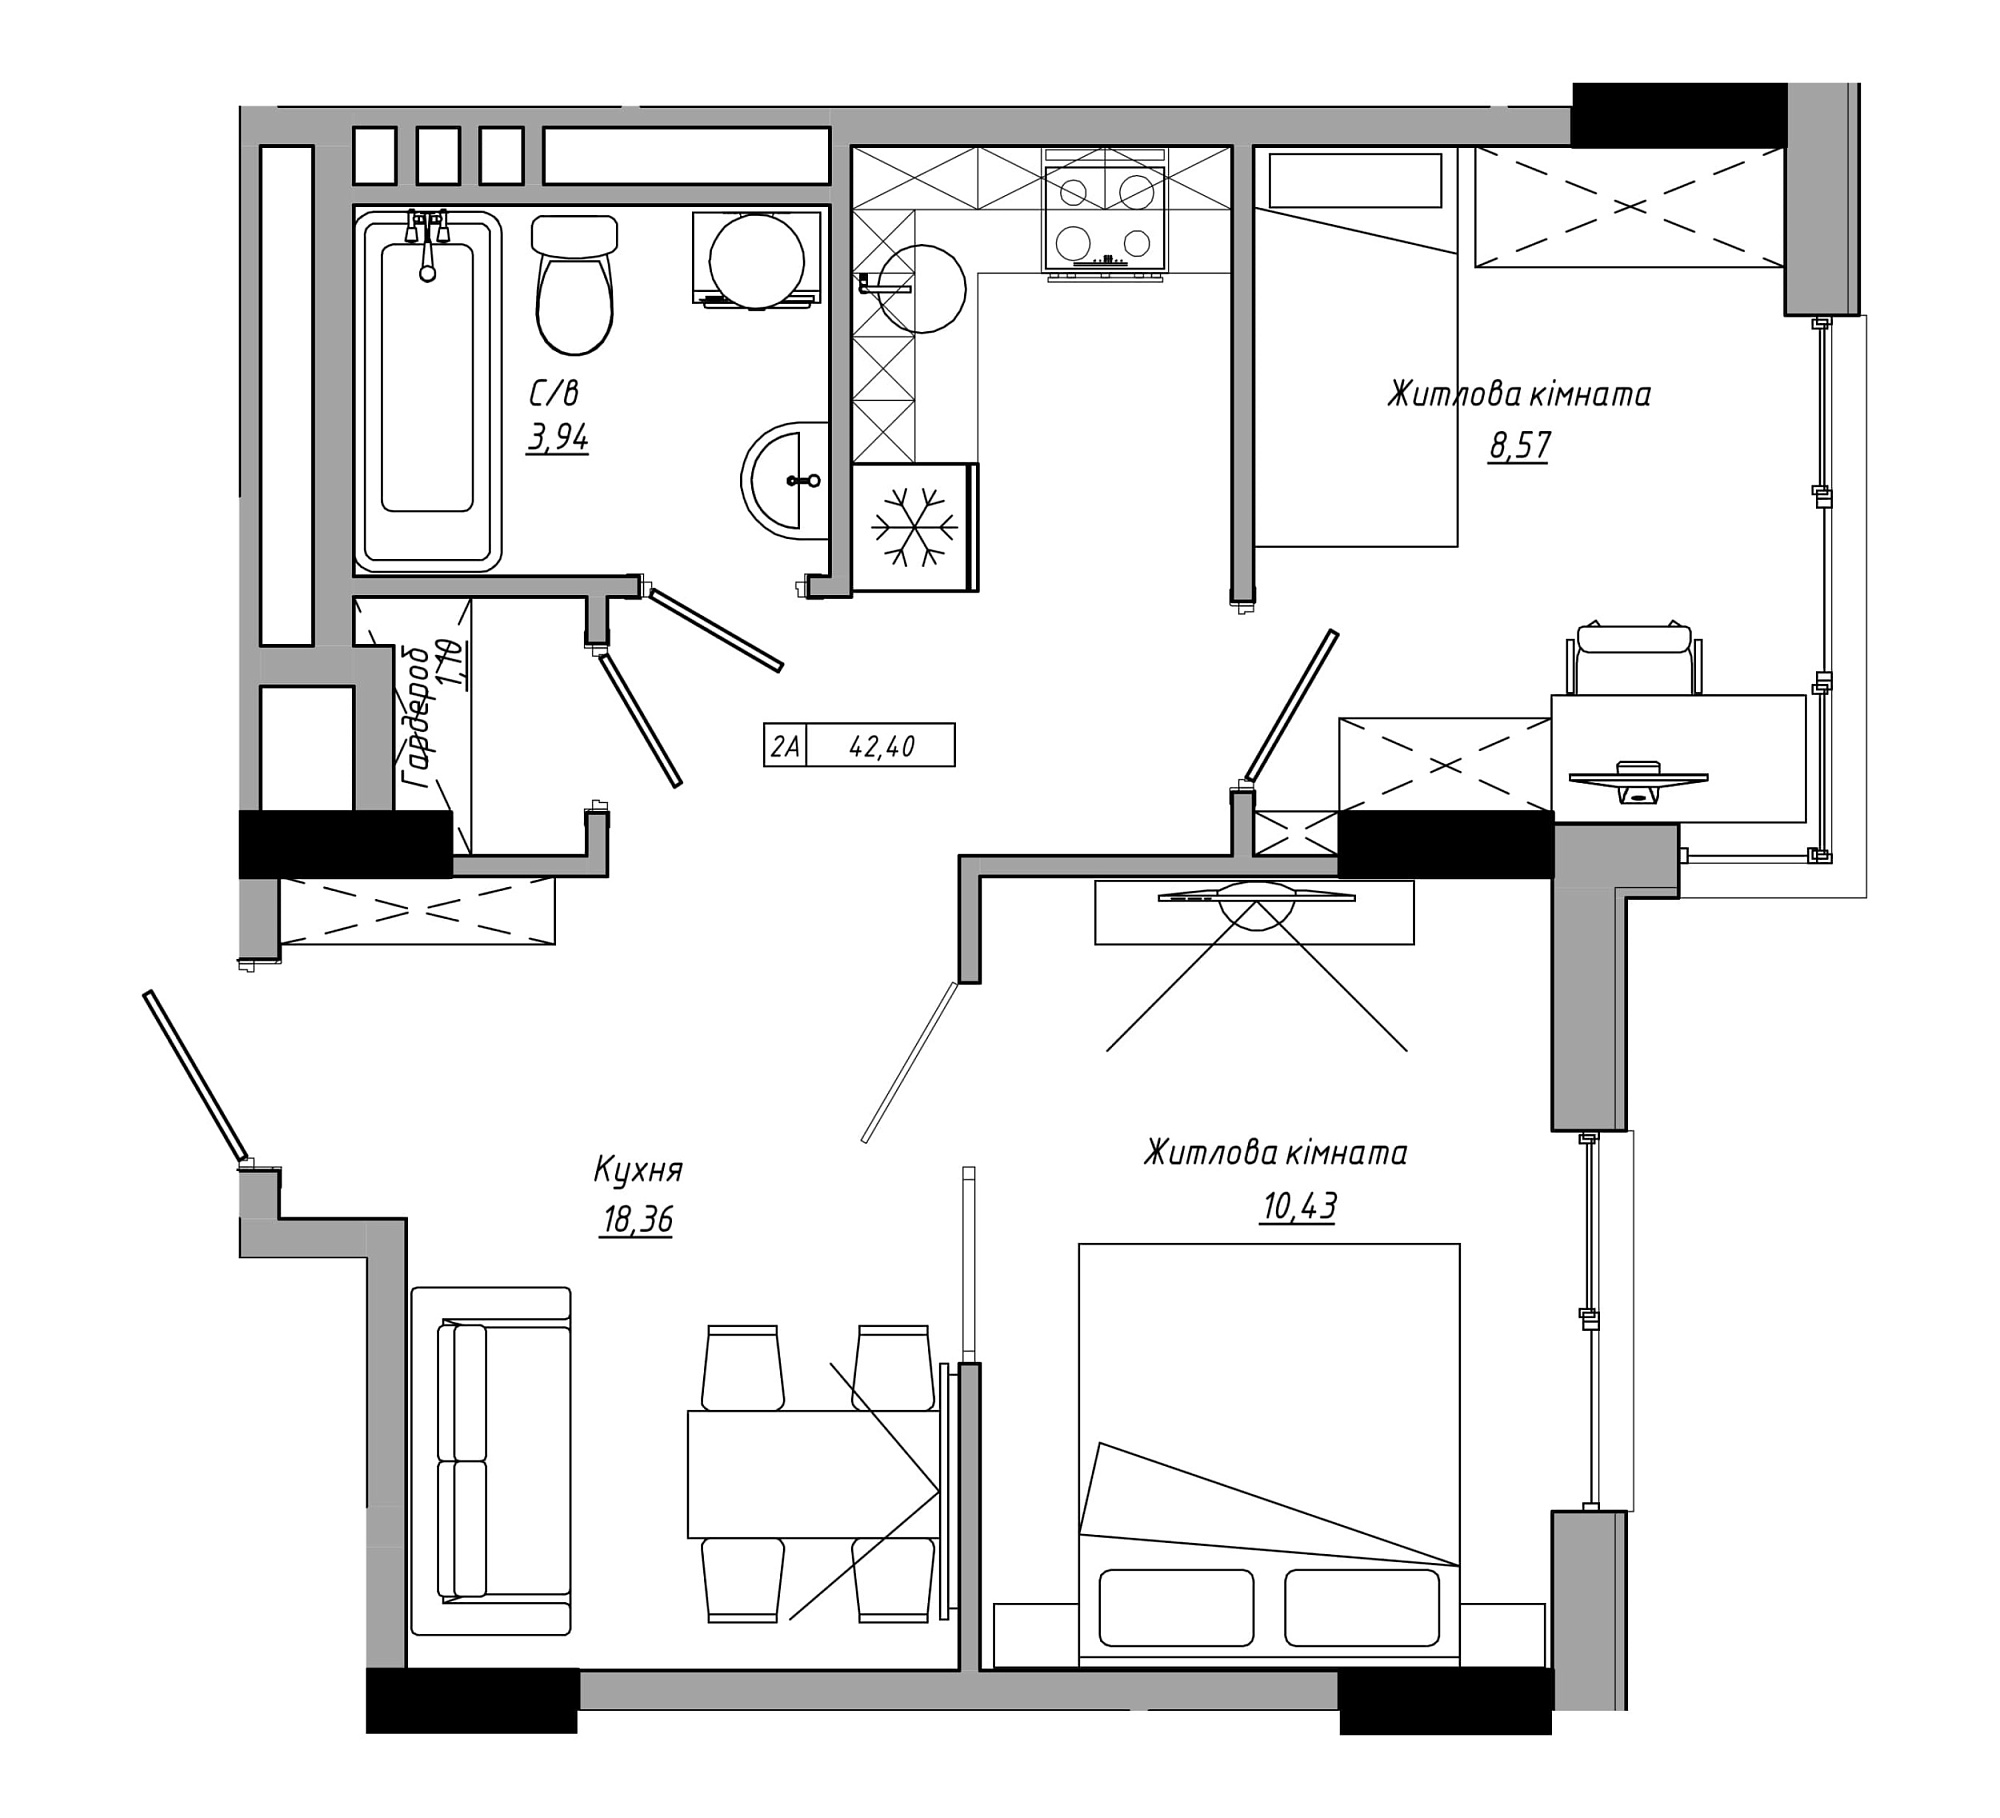 Planning 2-rm flats area 42.4m2, AB-21-14/00103.